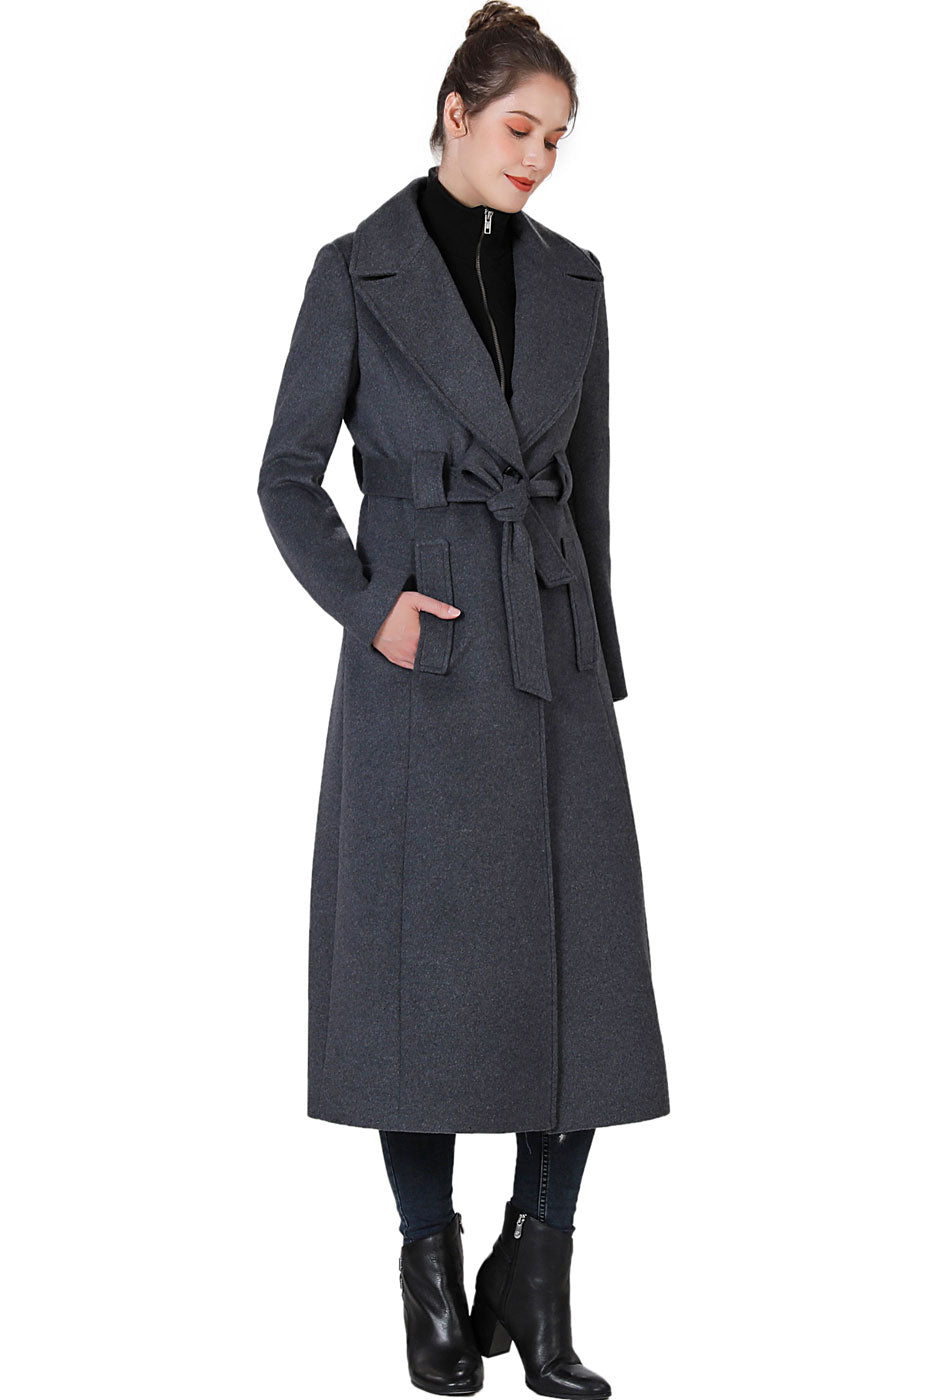 BGSD Women May Belted Wrap Wool Trench Coat